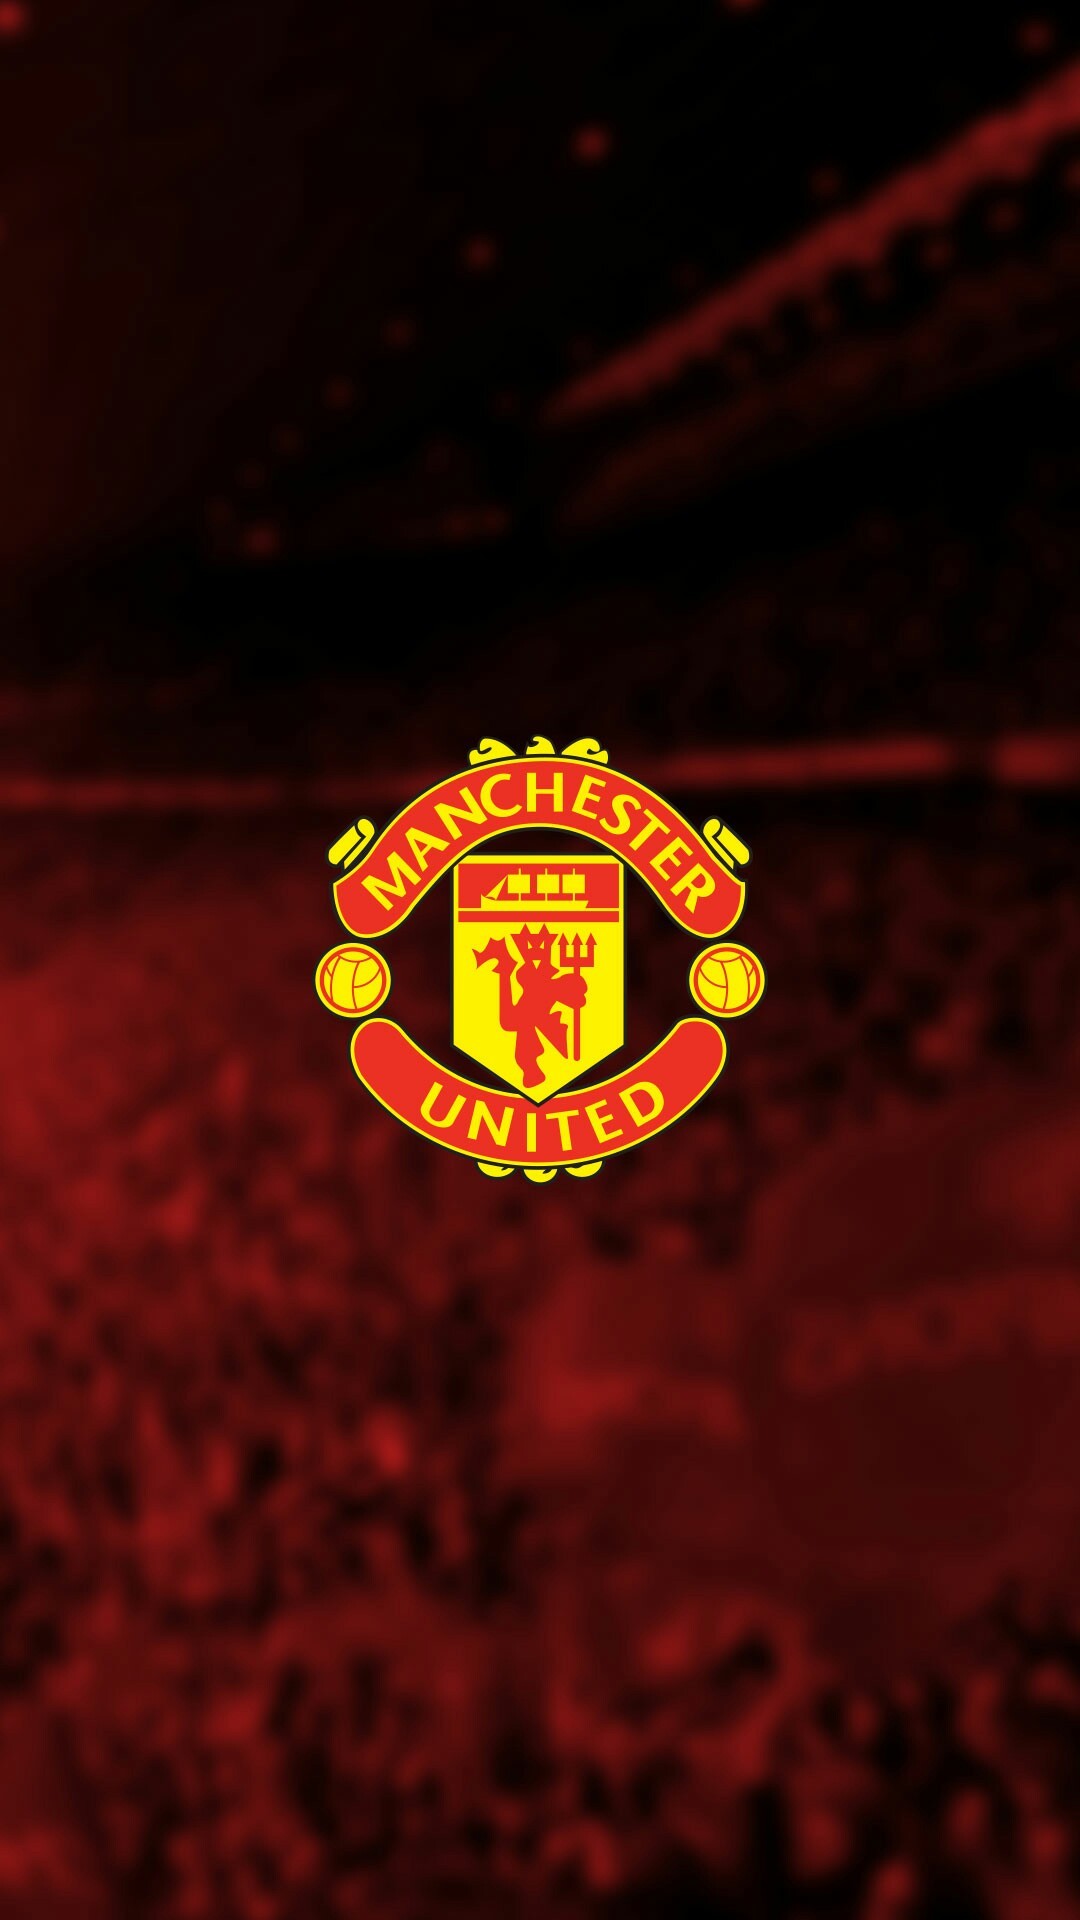 Manchester United wallpaper ·① Download free cool full HD wallpapers